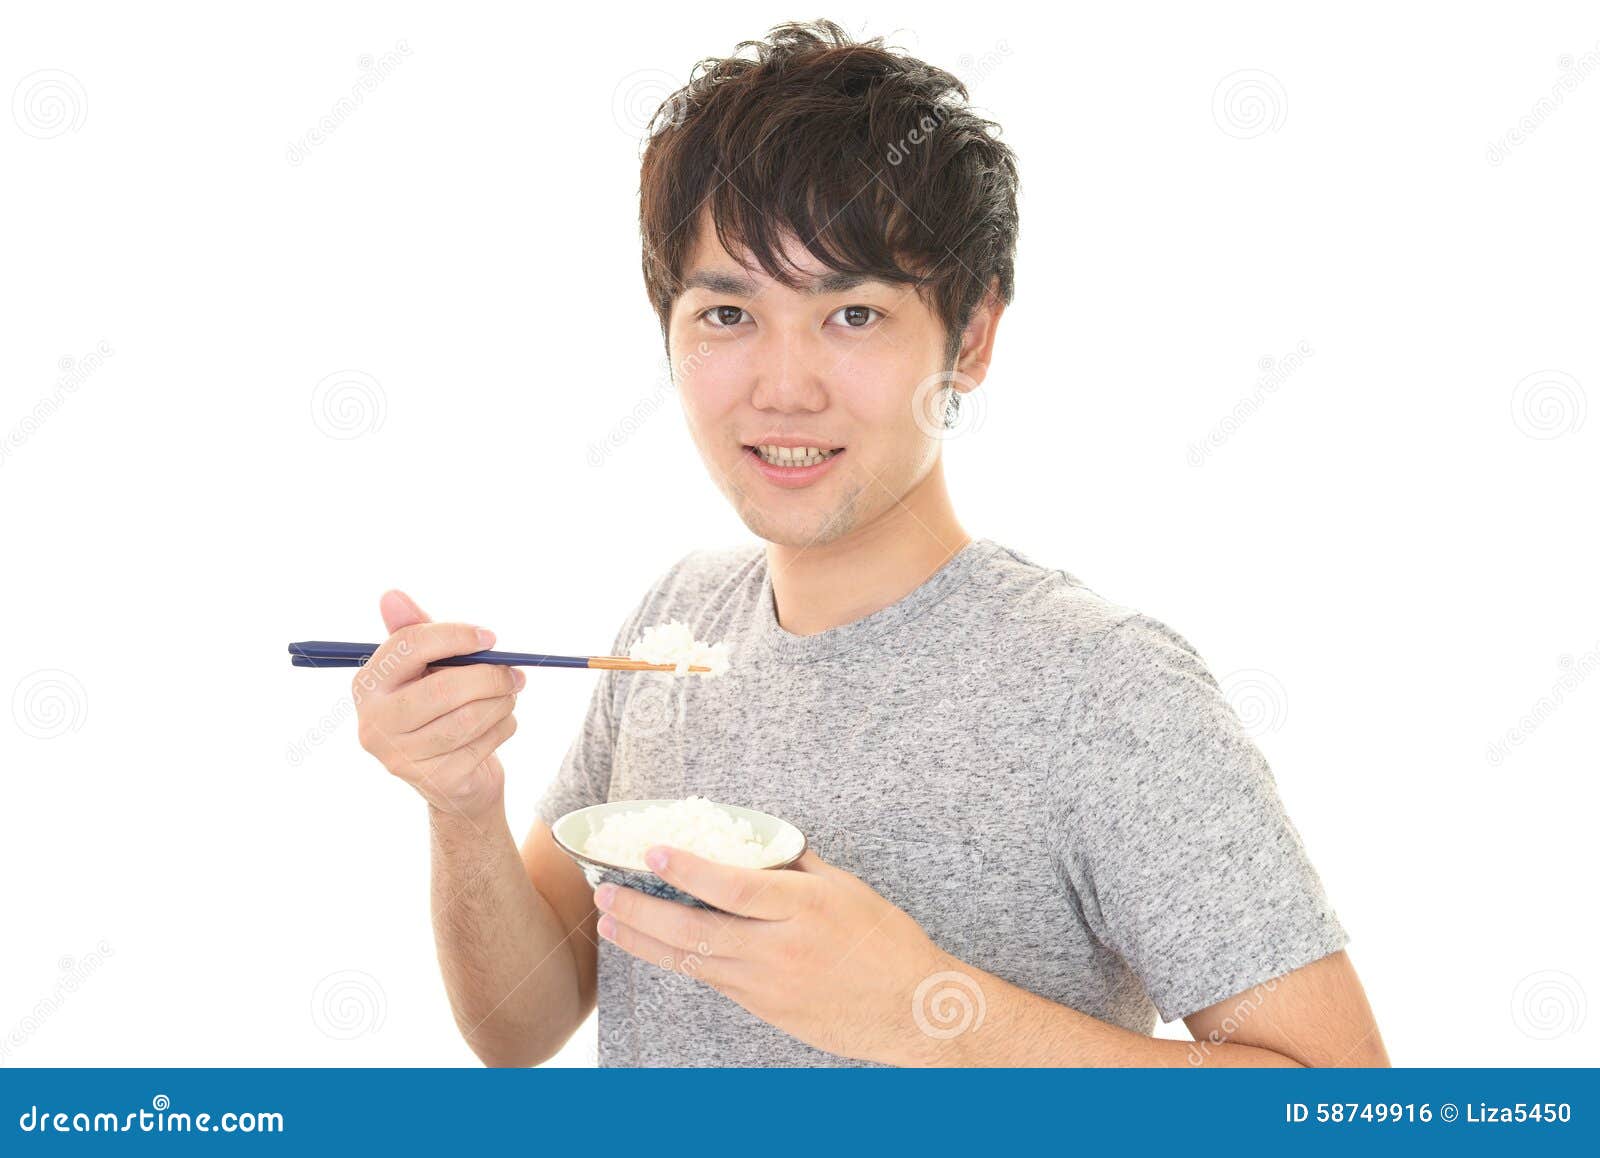 The man who eats food stock photo. Image of dinner, diet - 58749916